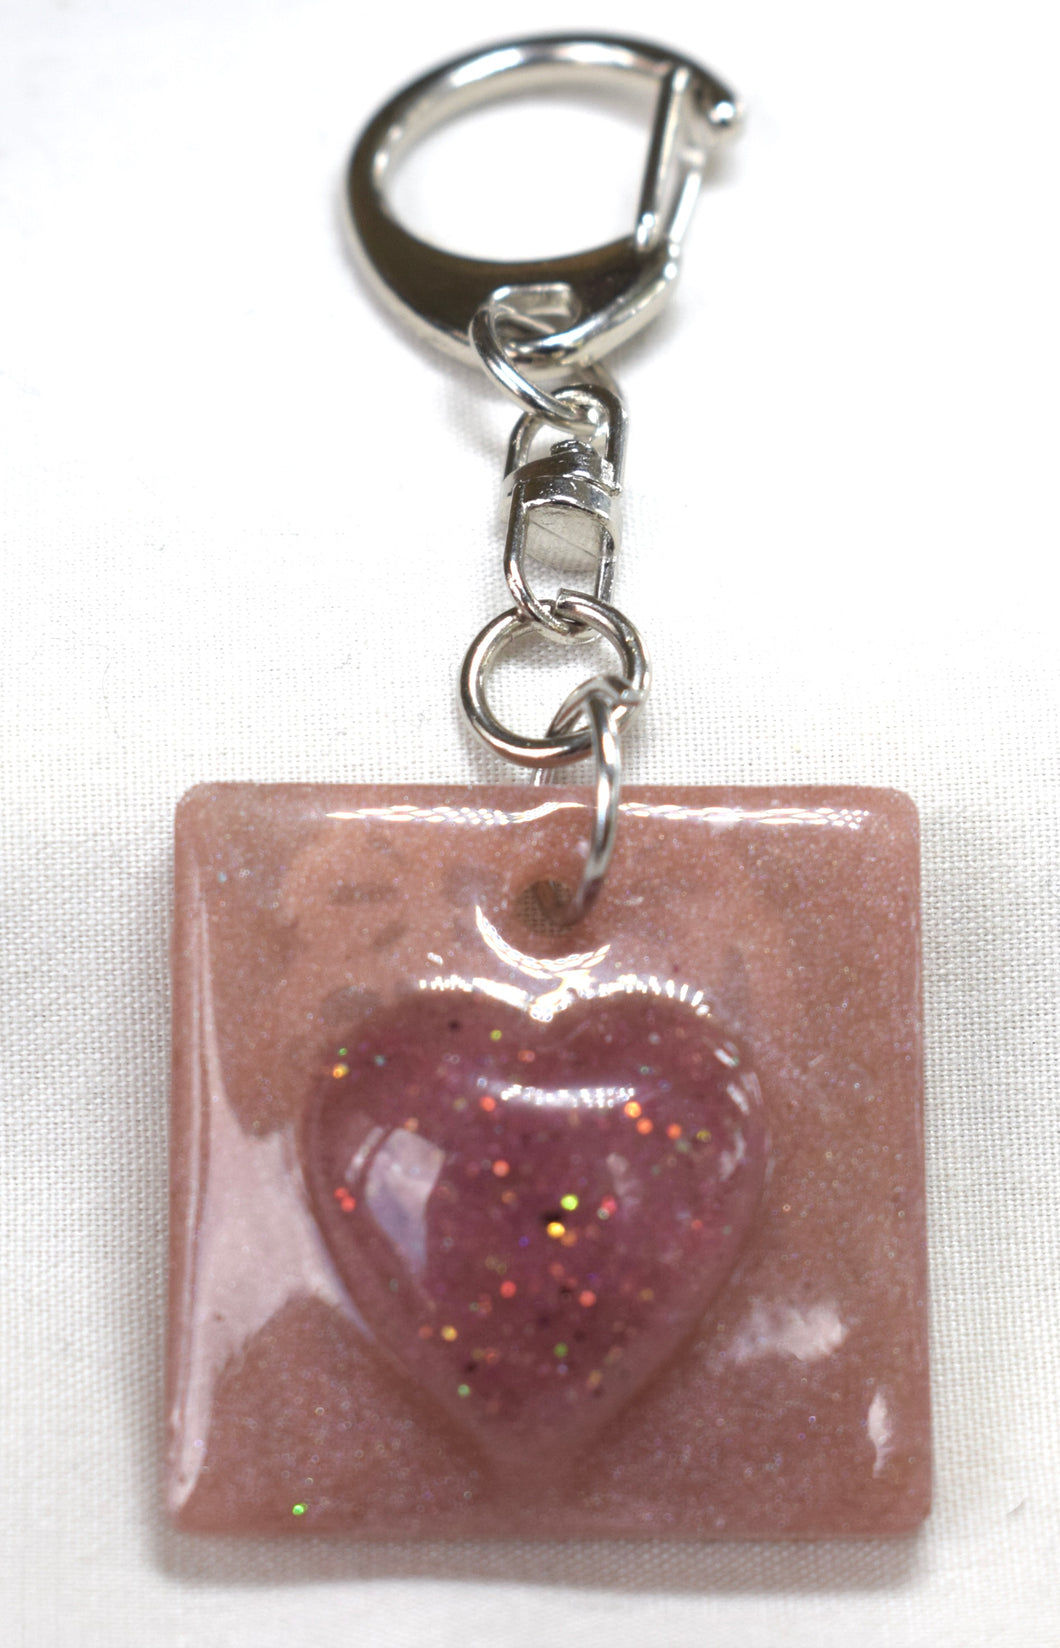 Affirmation Heart Keychain - You Got This (pink)